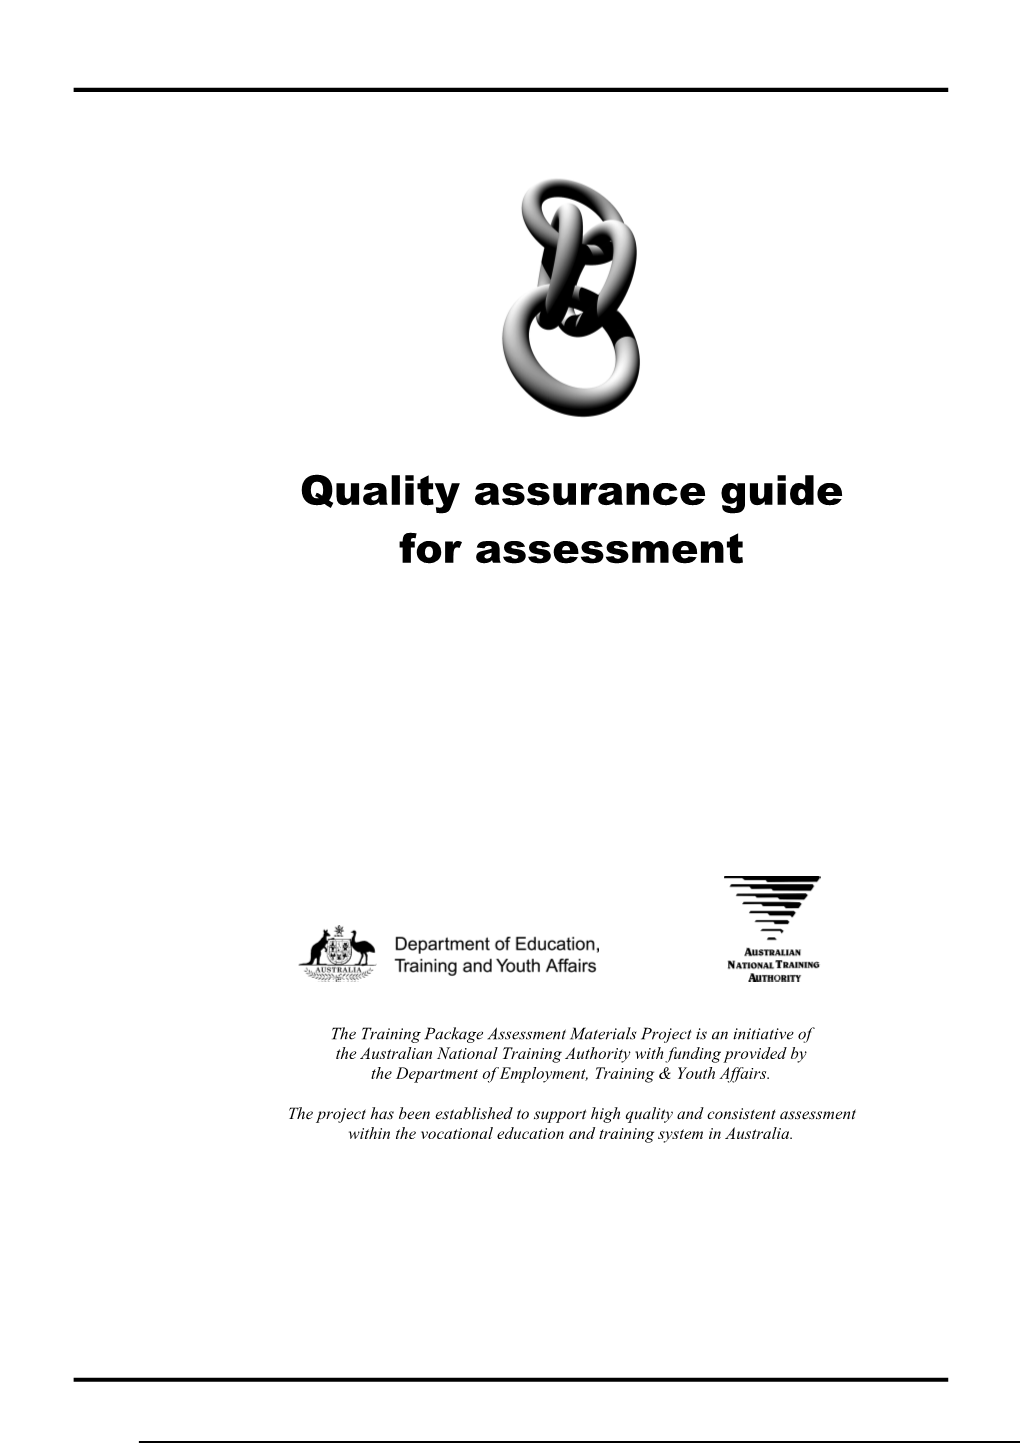 Quality Assurance Guide for Assessment